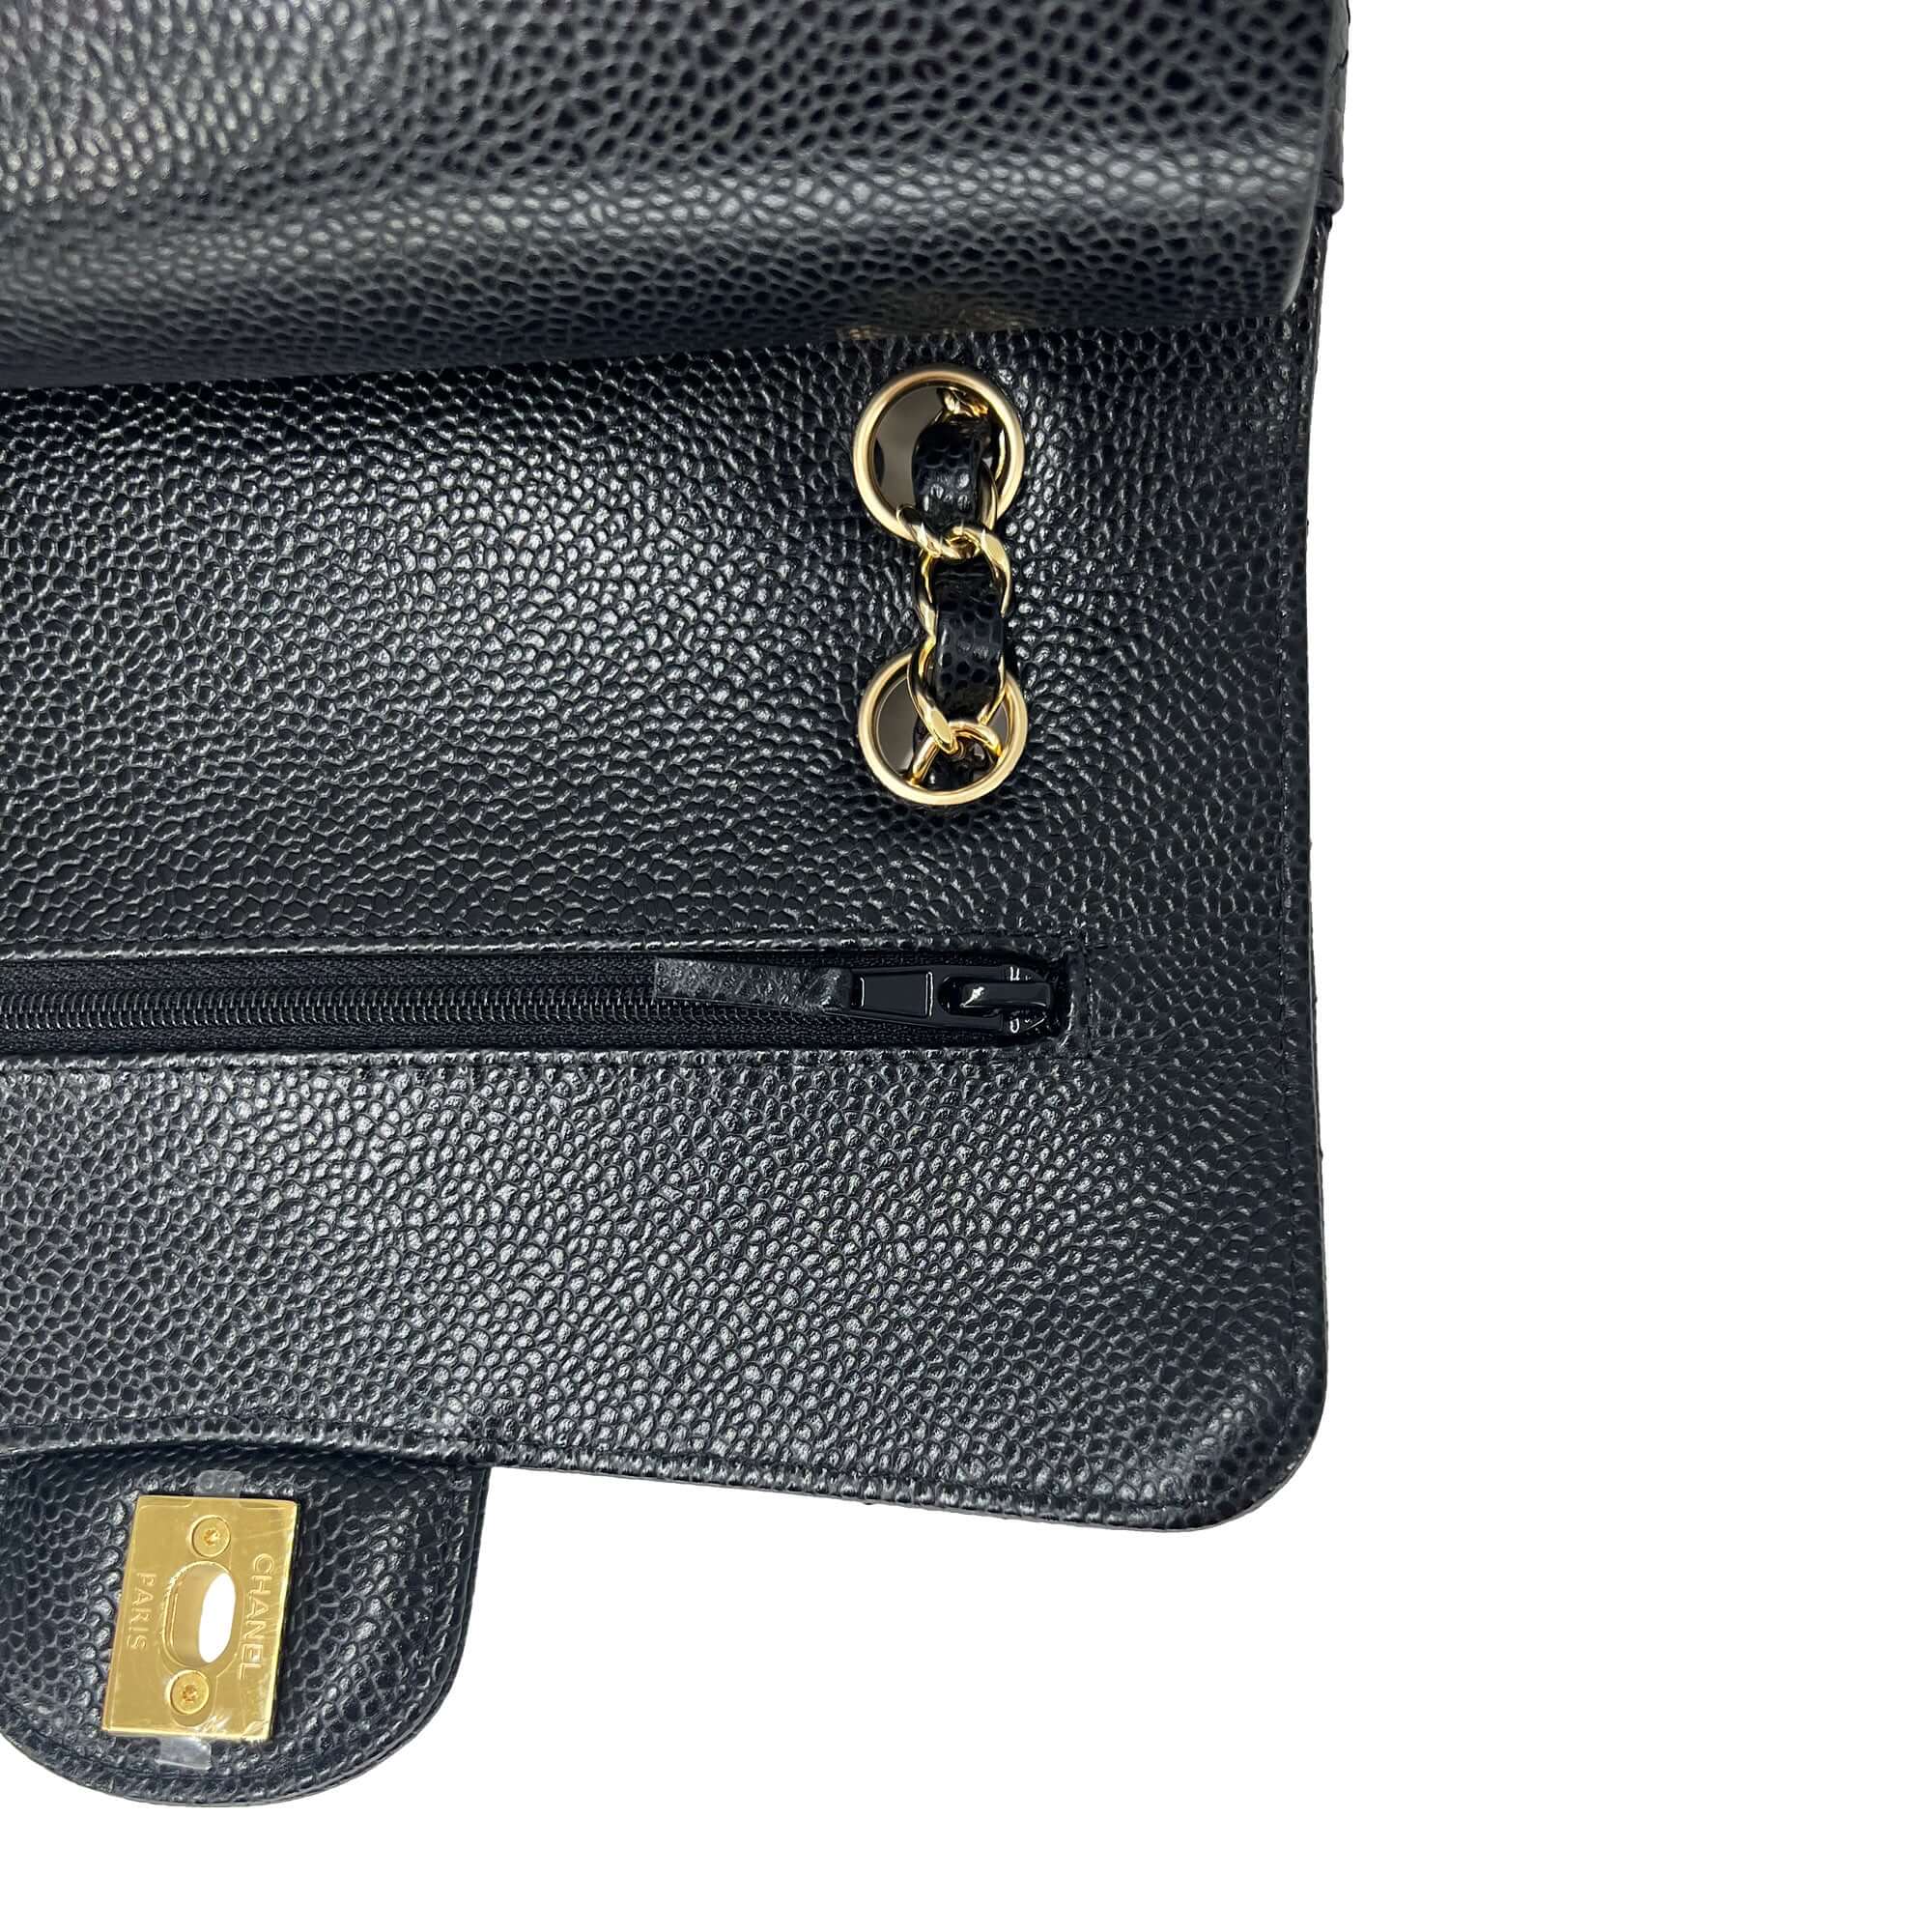 Chanel small black caviar leather double flap closure bag